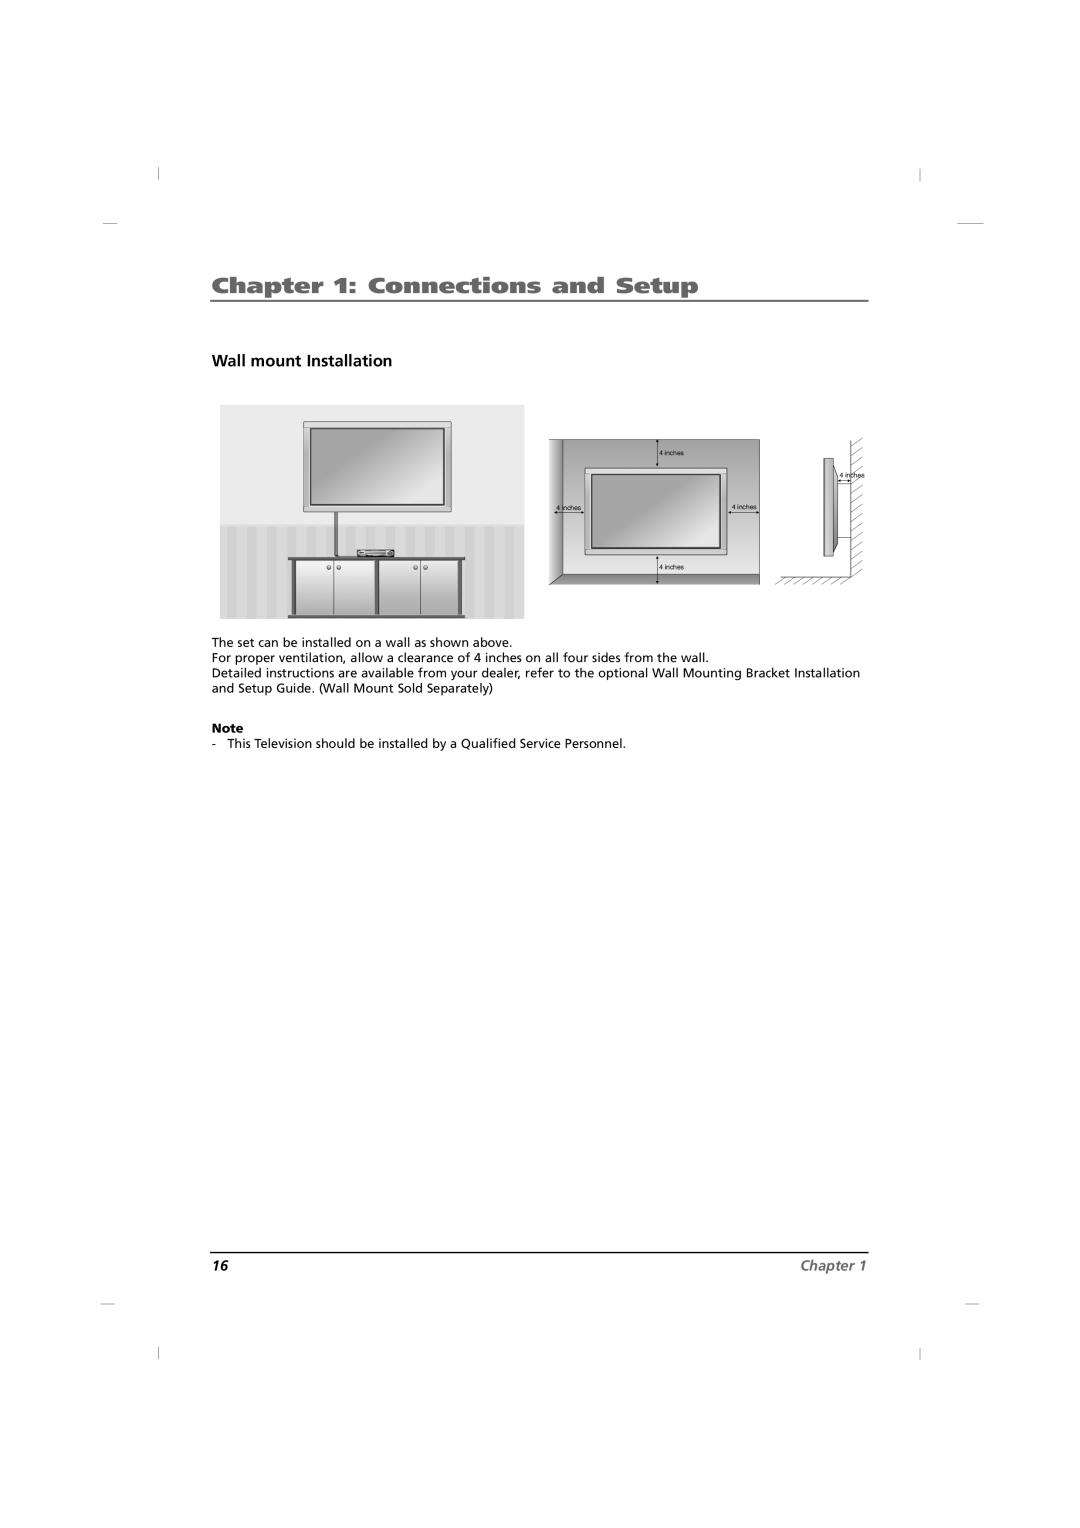 RCA J42HE820, J32HE720, J26HE820 manual Wall mount Installation, Connections and Setup, Chapter 